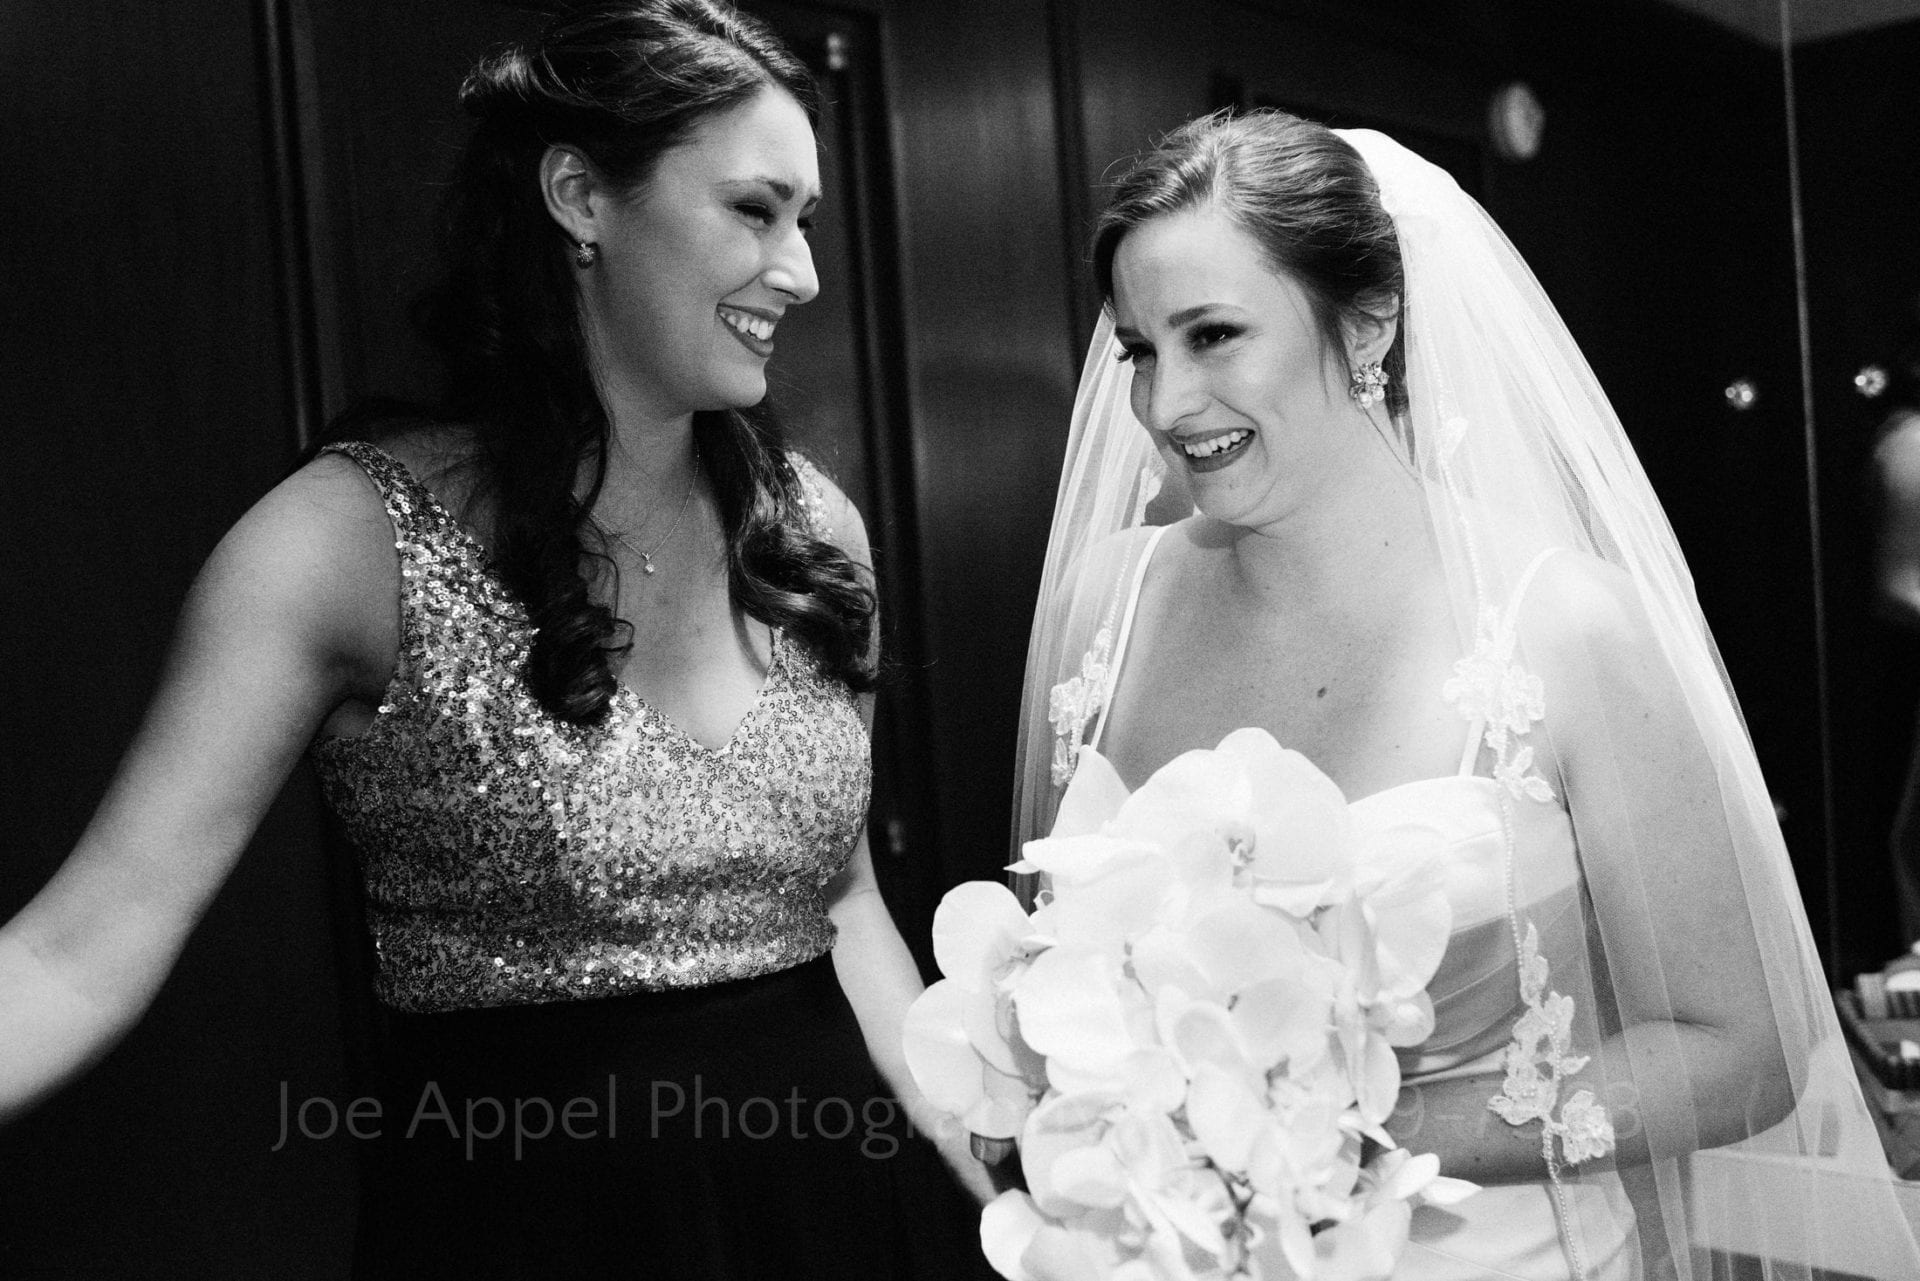 A bride holds her bouquet as she stands in a dark room with her bridesmaid who is wearing a dress with a sequined top.